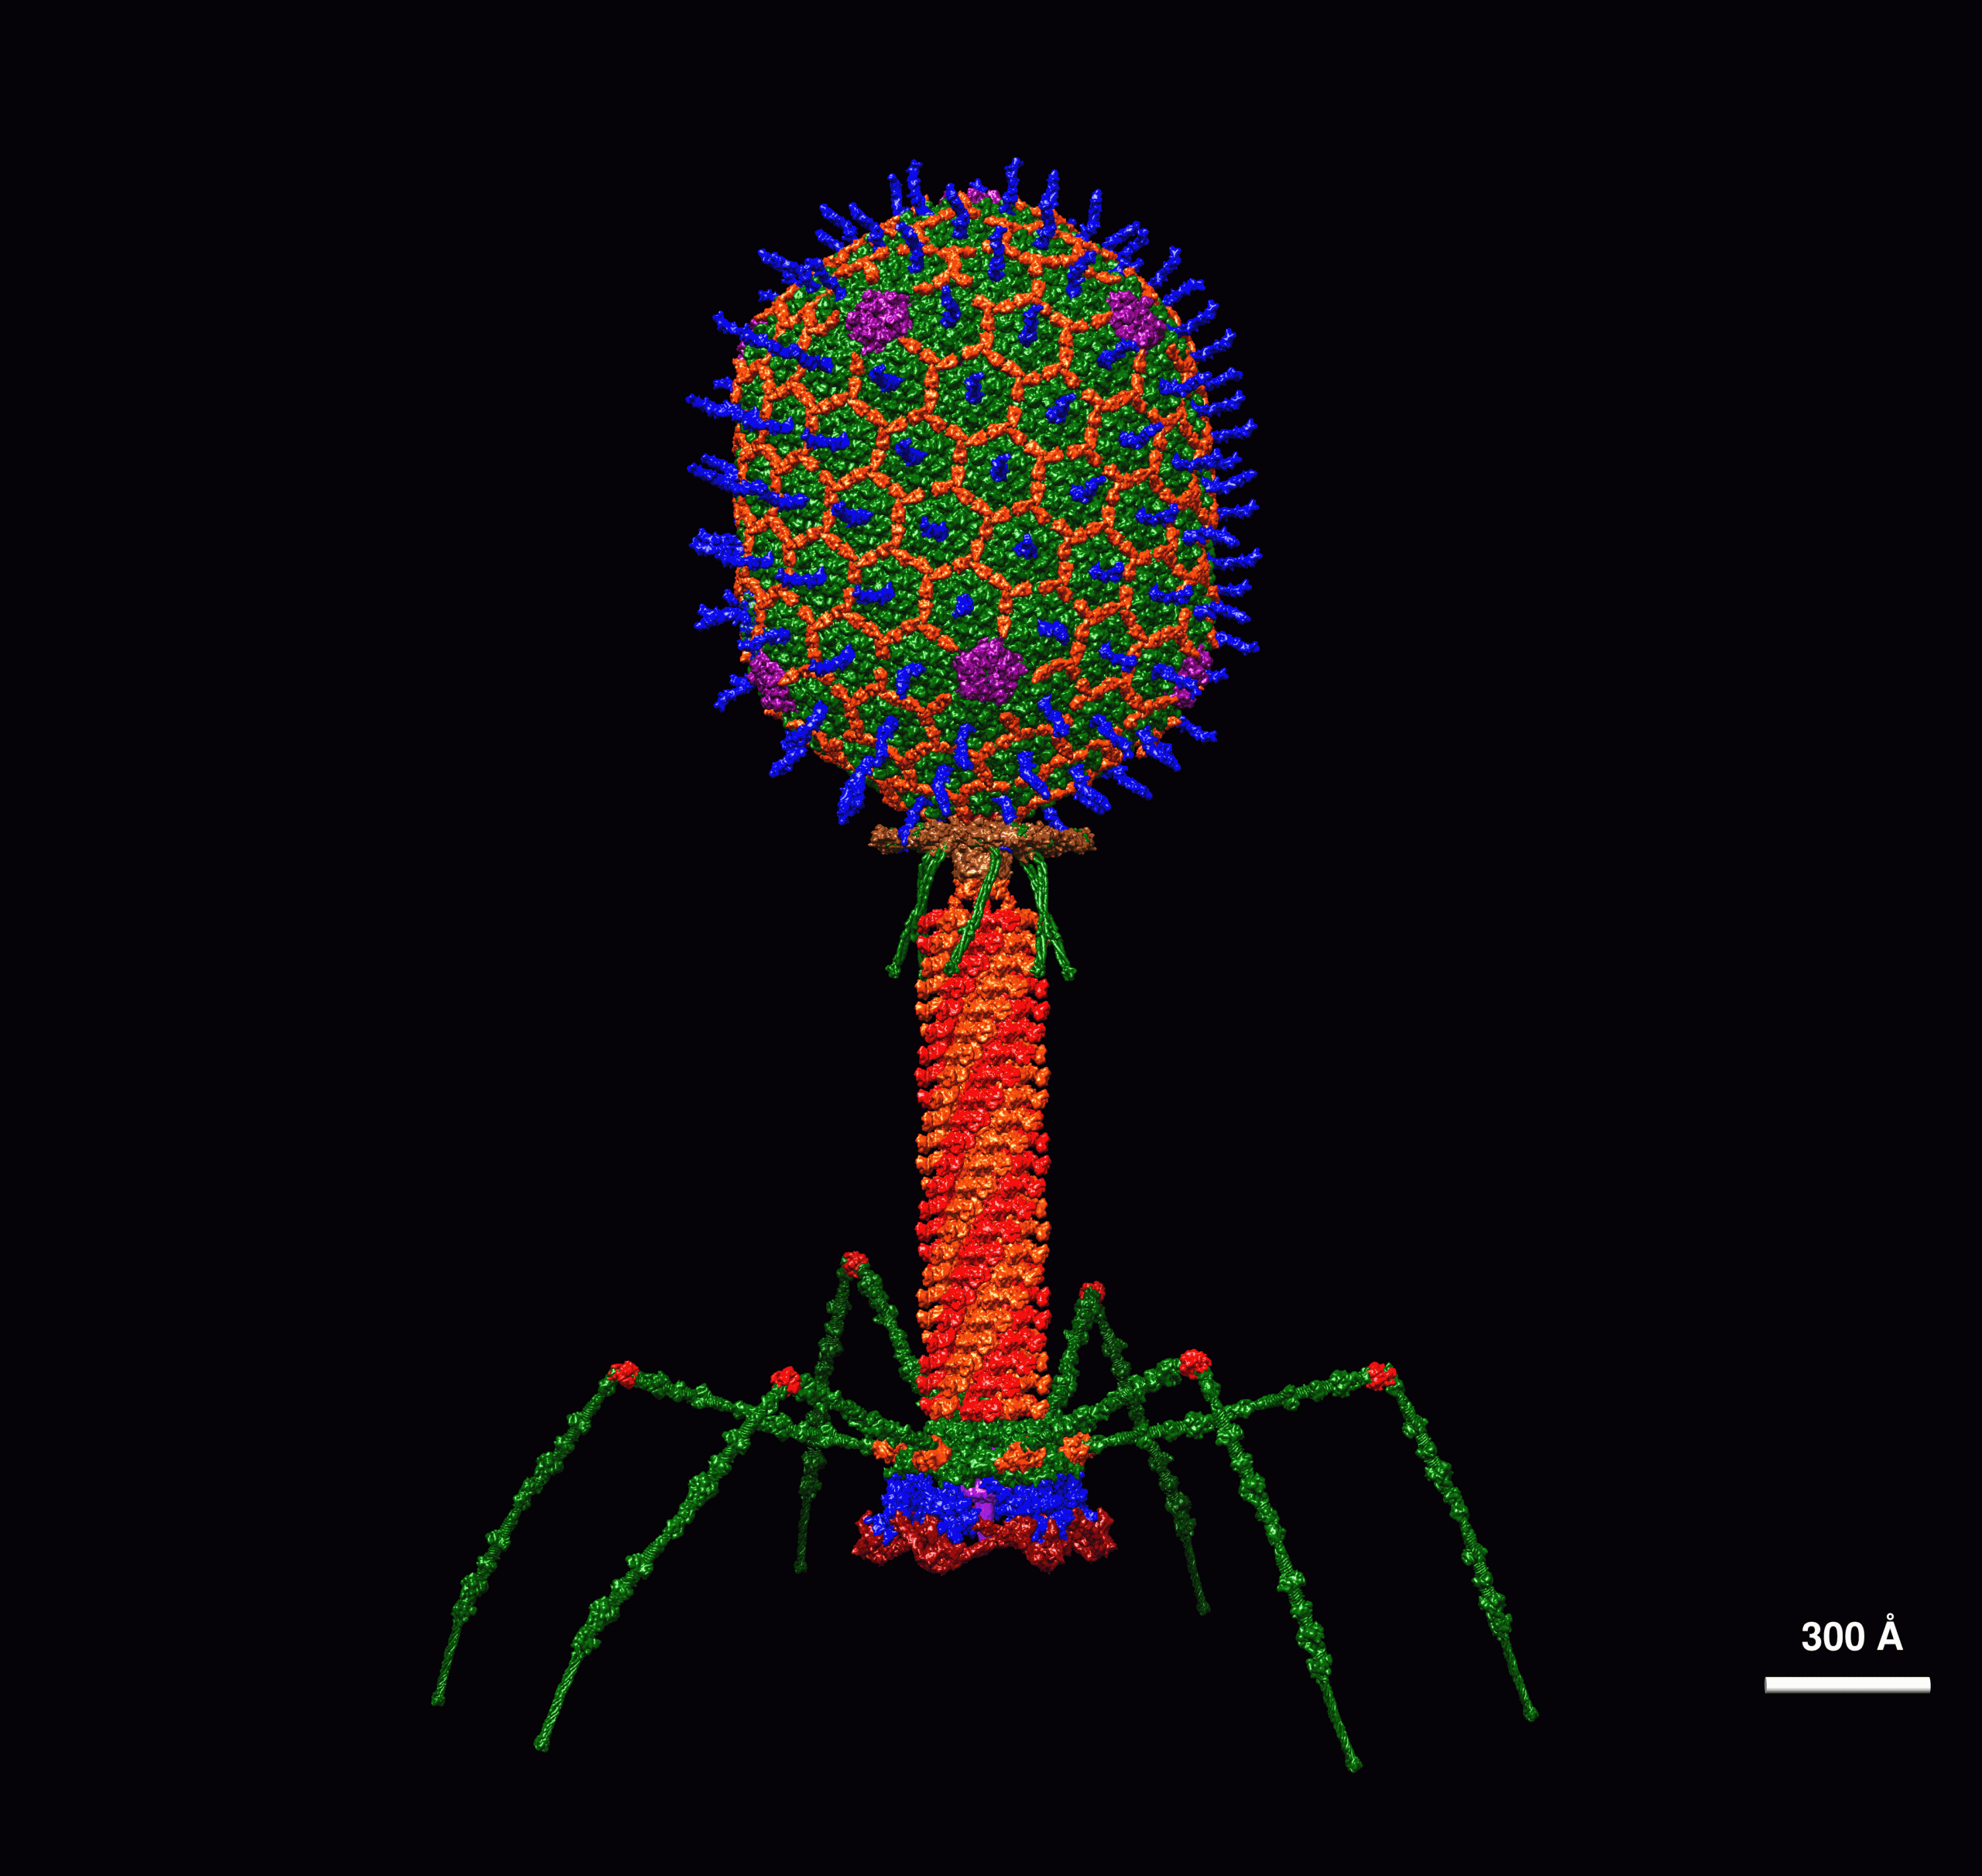 Bacteriophage 3D image.